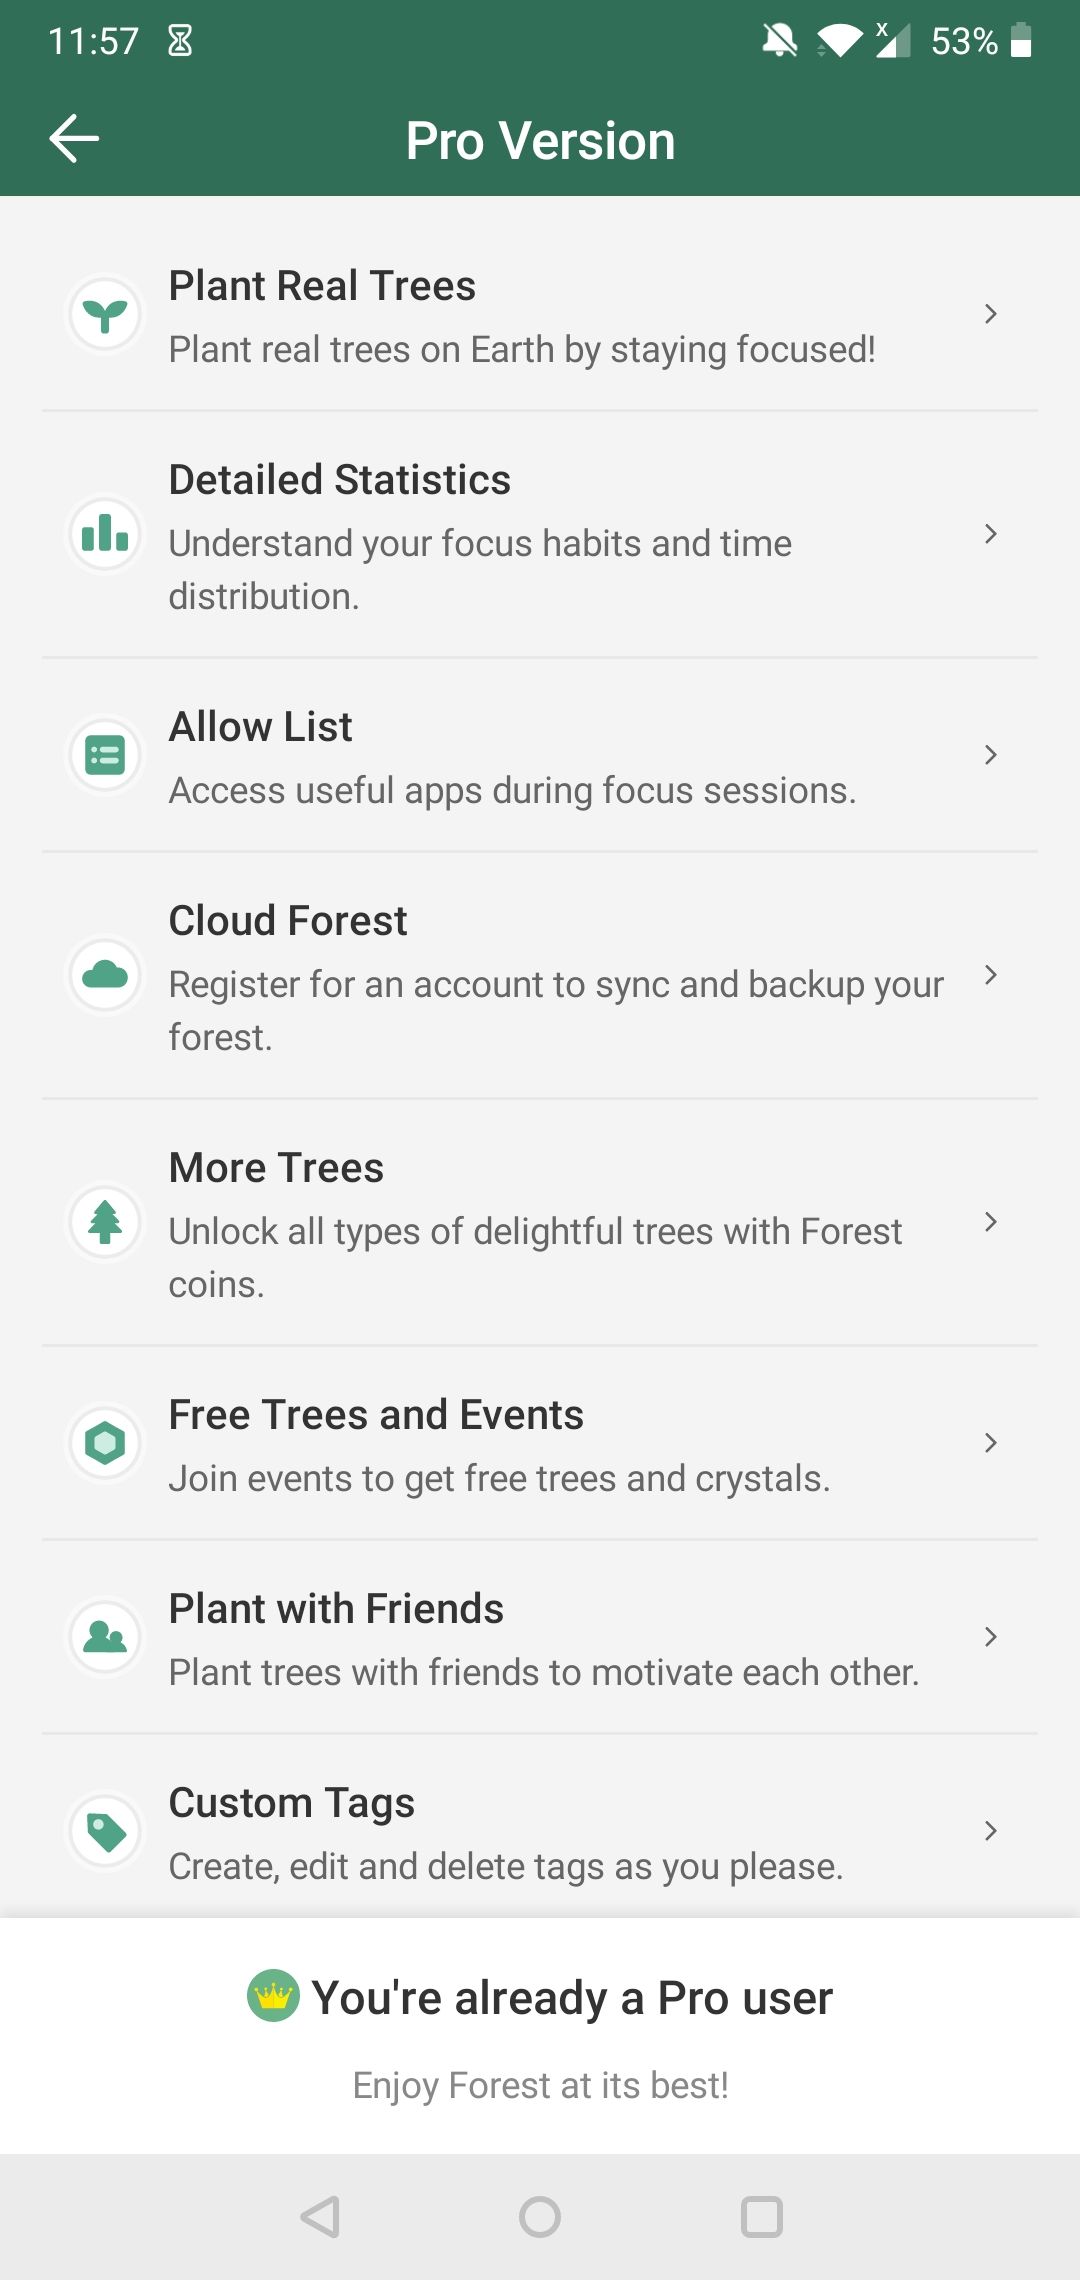 The "Pro Version" section on the Forest Android app.